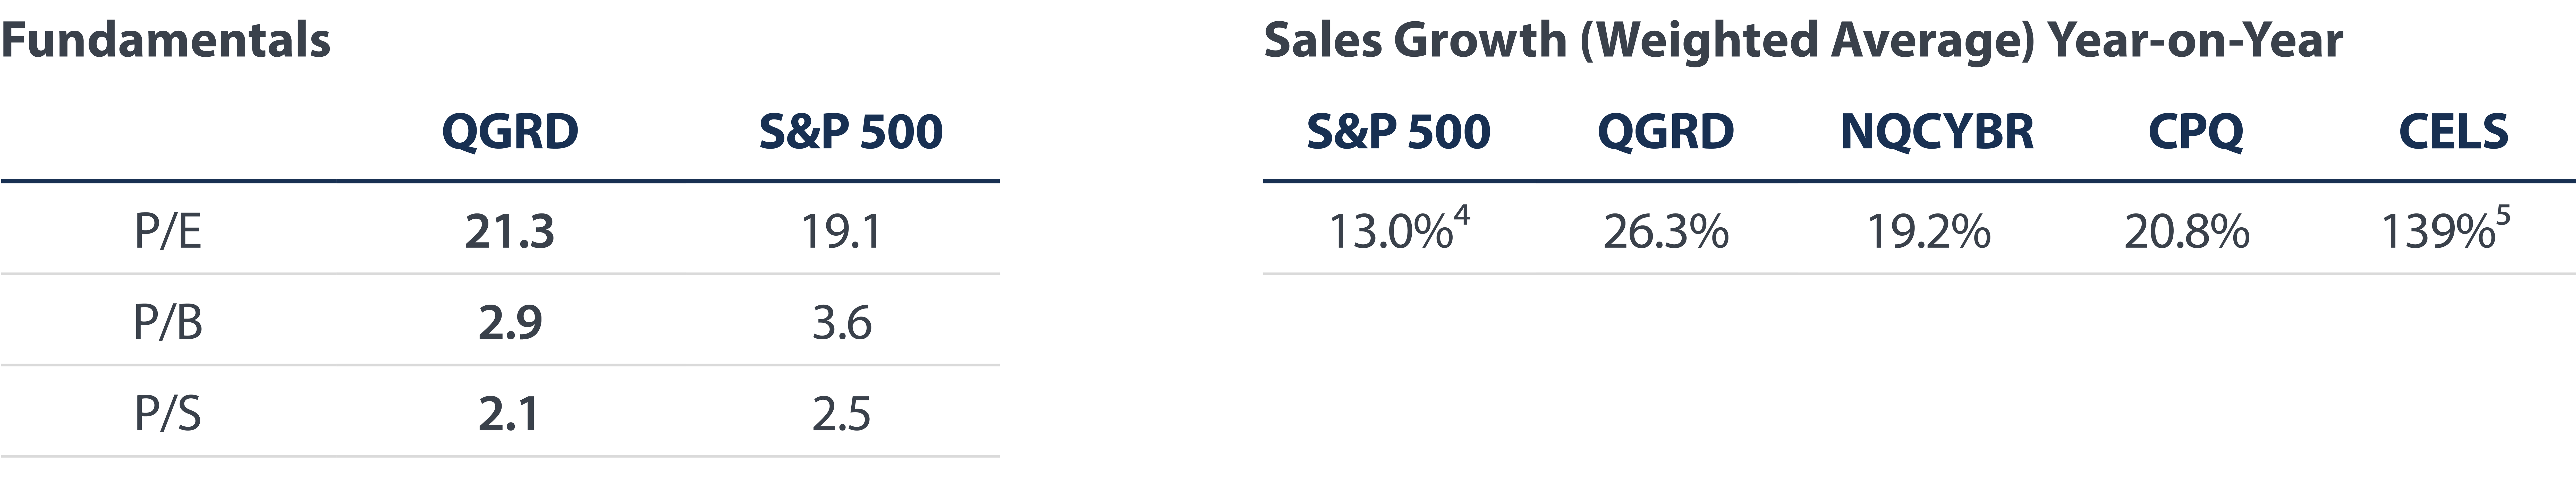 Fundamentals and Sales Growth Tables